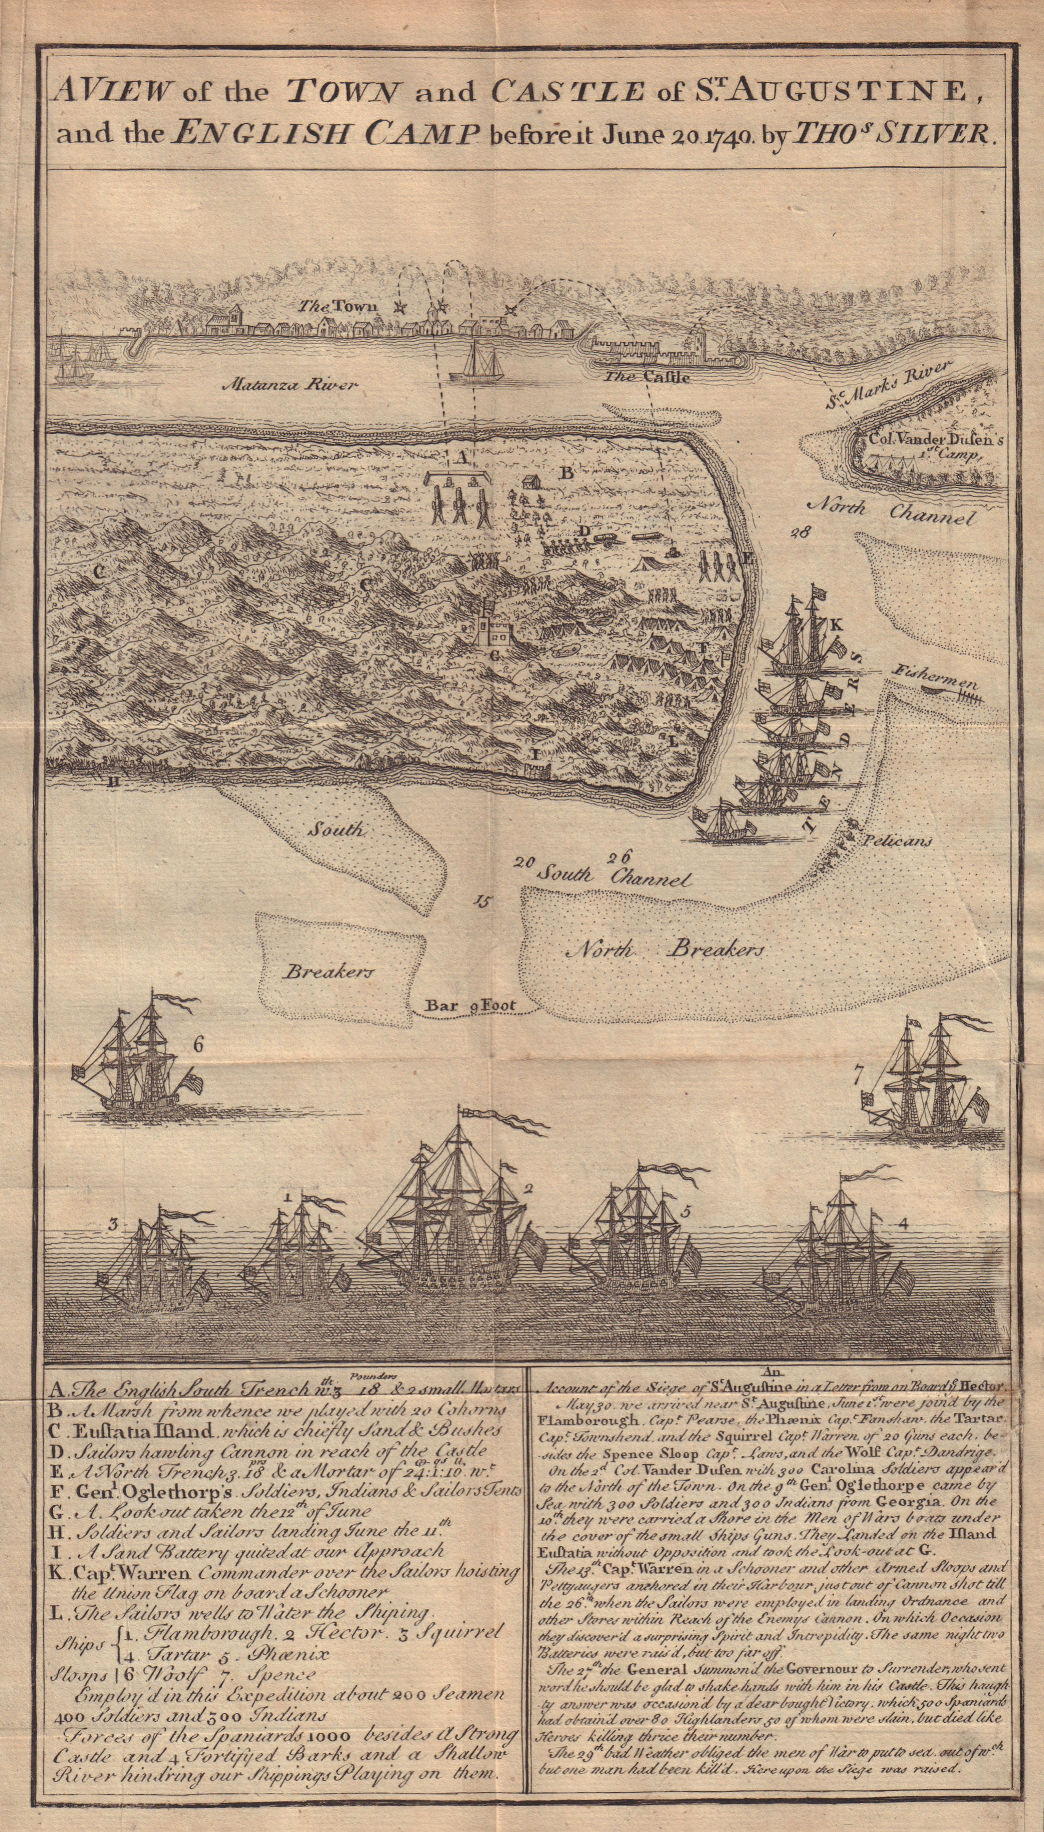 Associate Product The town & castle of St. Augustine. 1740 siege. Spanish Florida. SILVER 1740 map